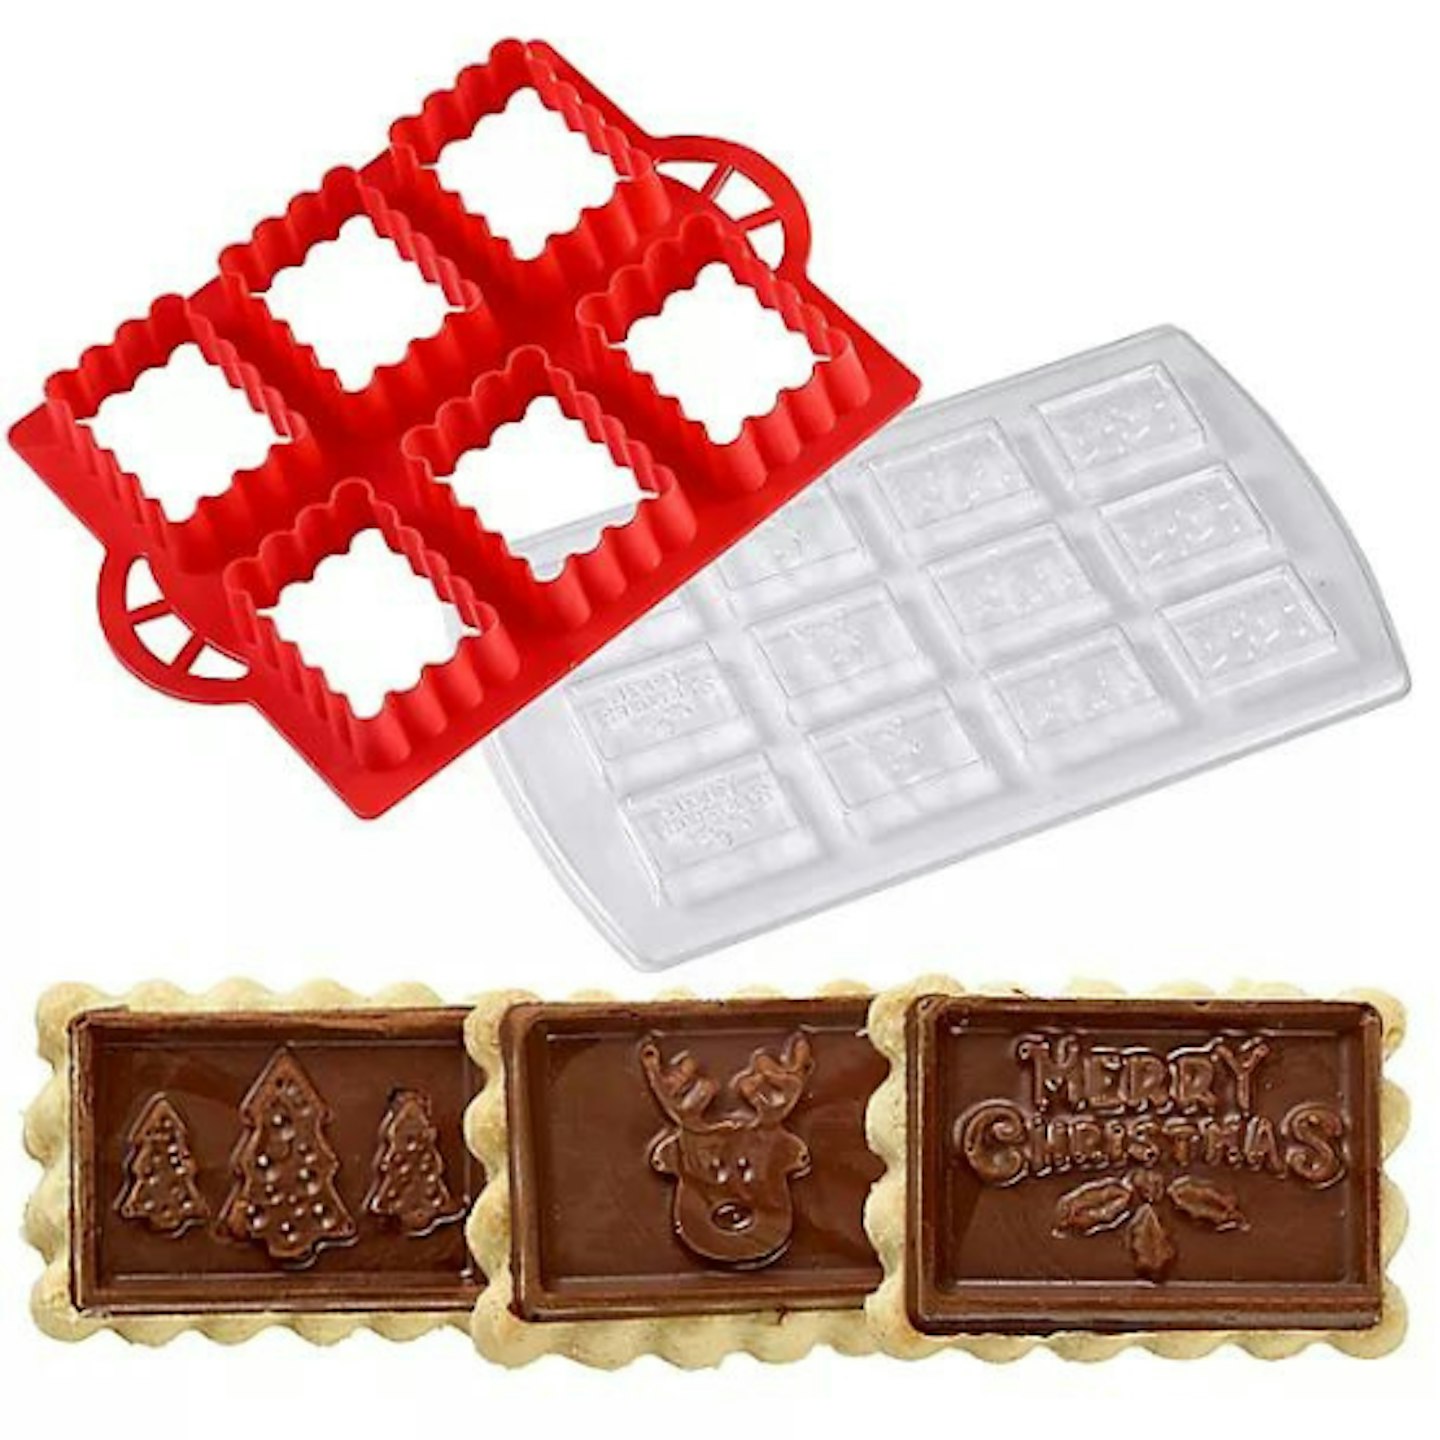 Christmas cookie cutters chocolate biscuits